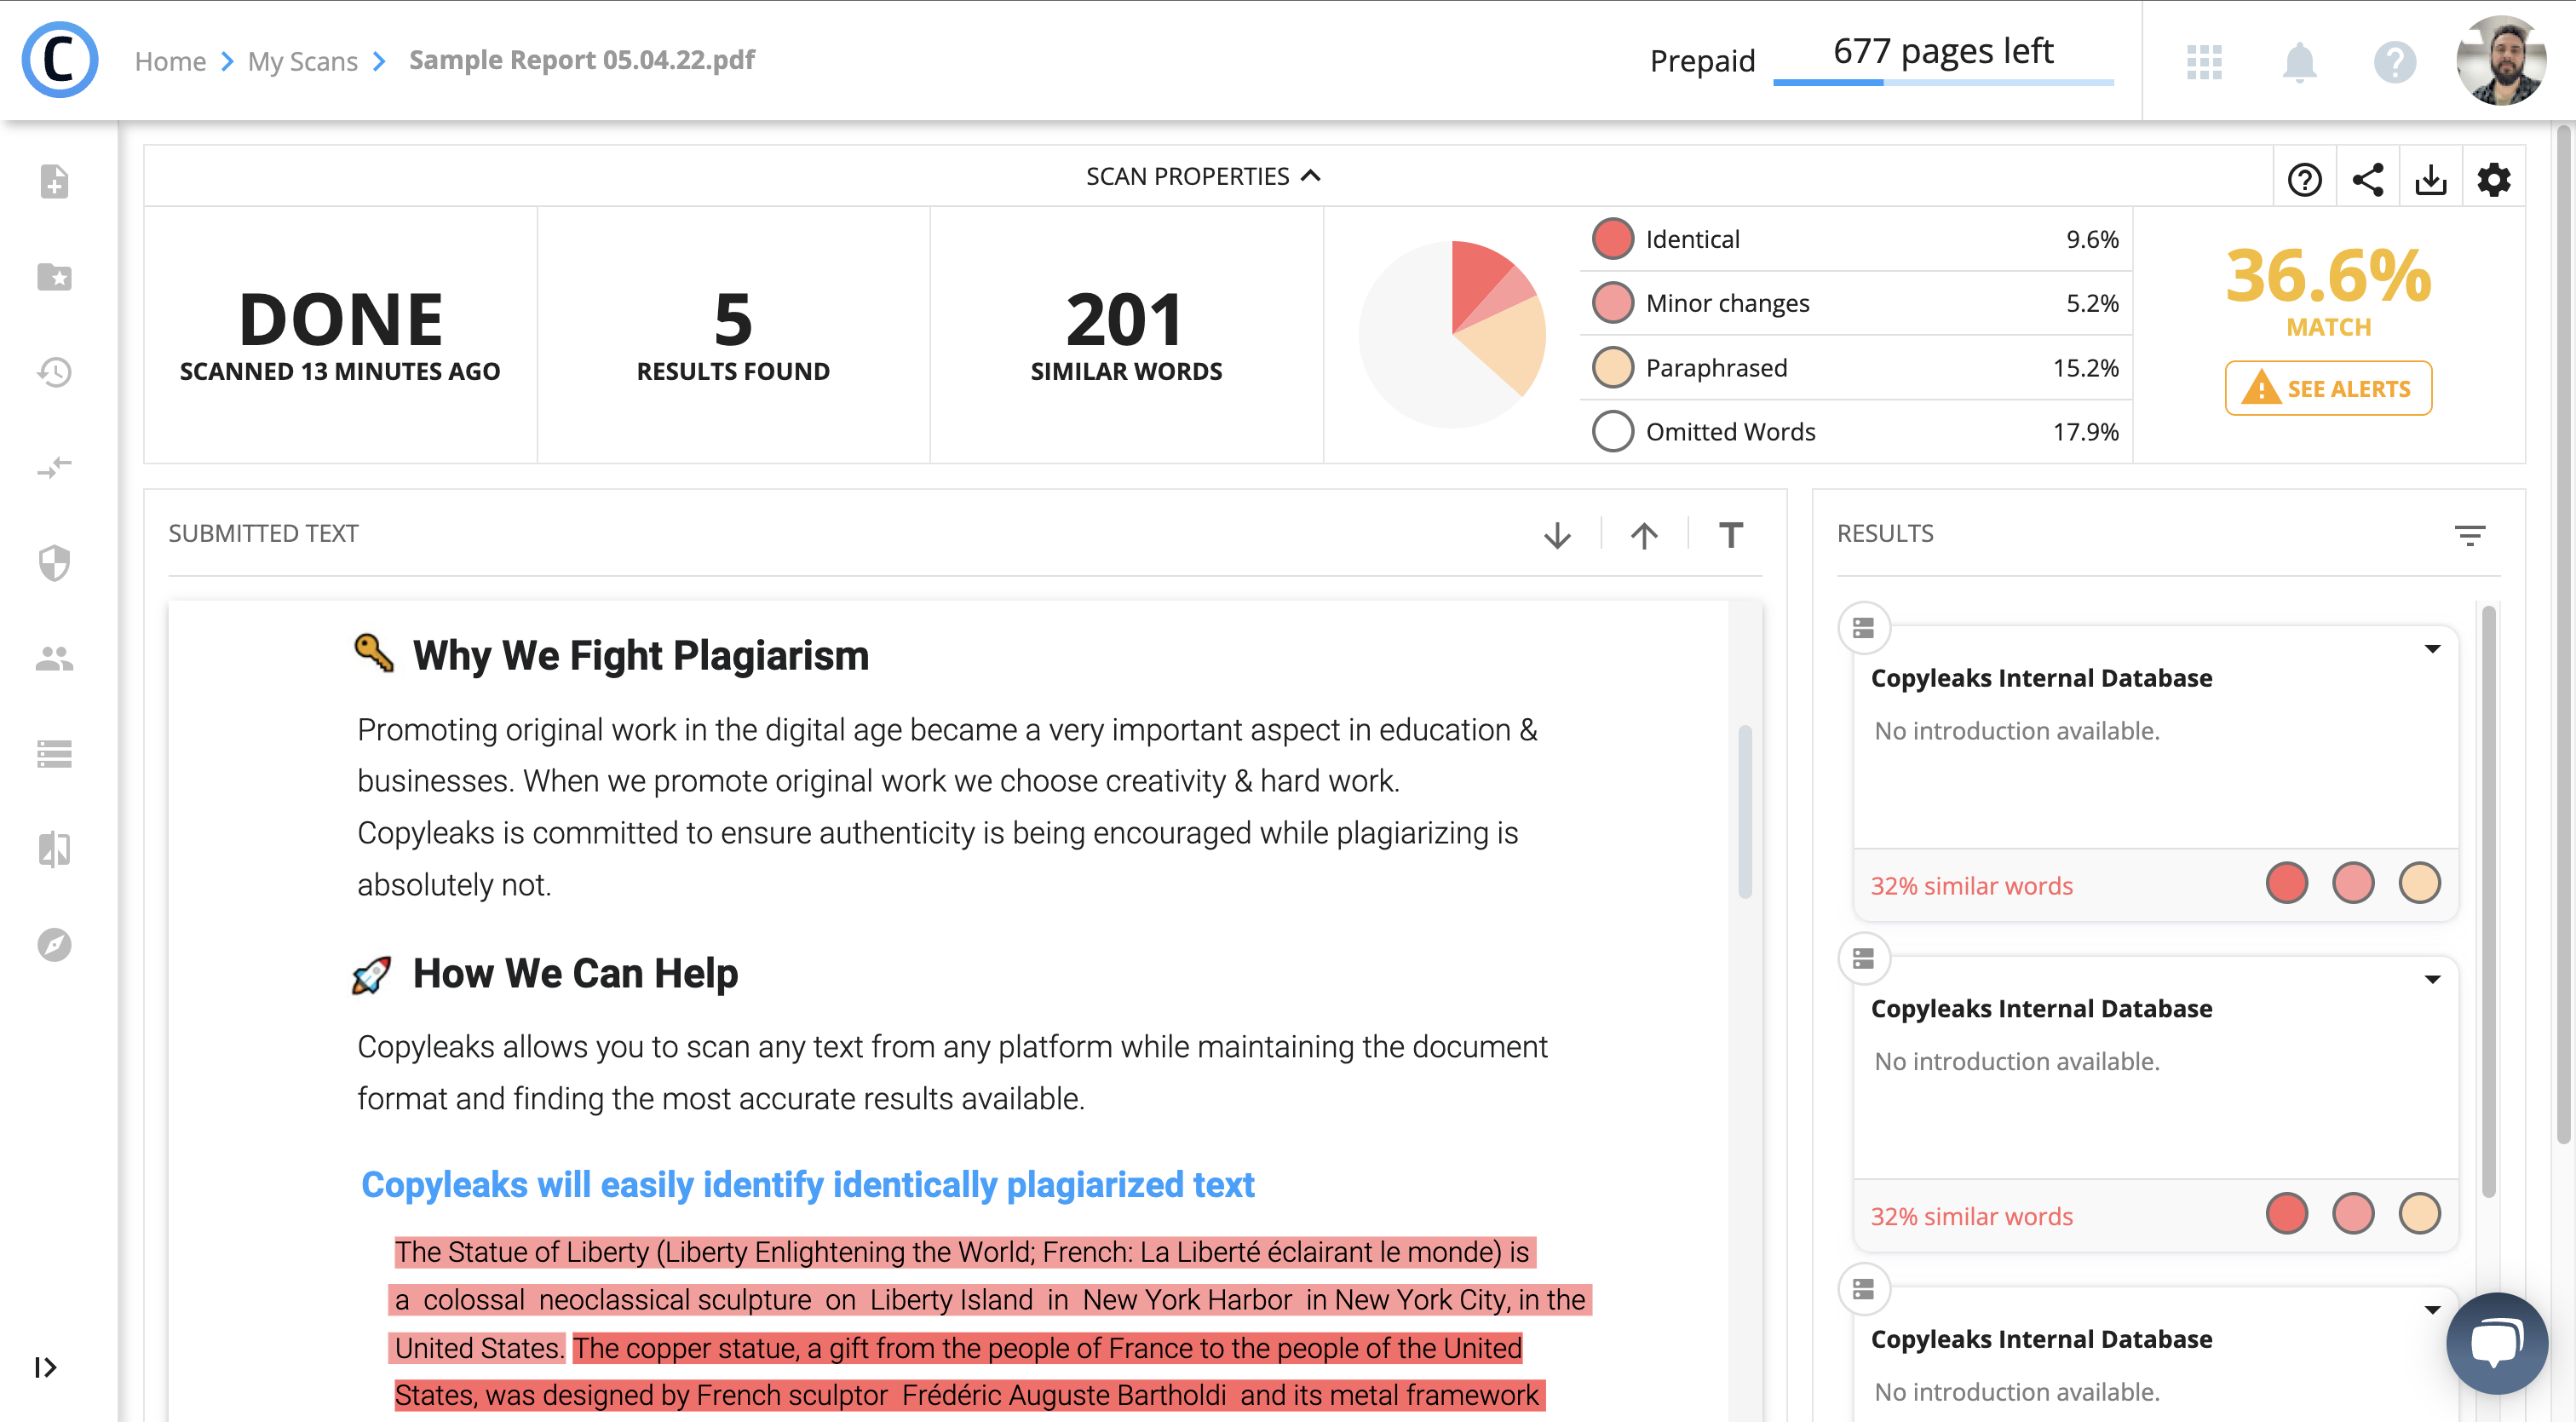 Copyleaks Plagiarism Checker Review 2023: Pros, Cons, and Pricing